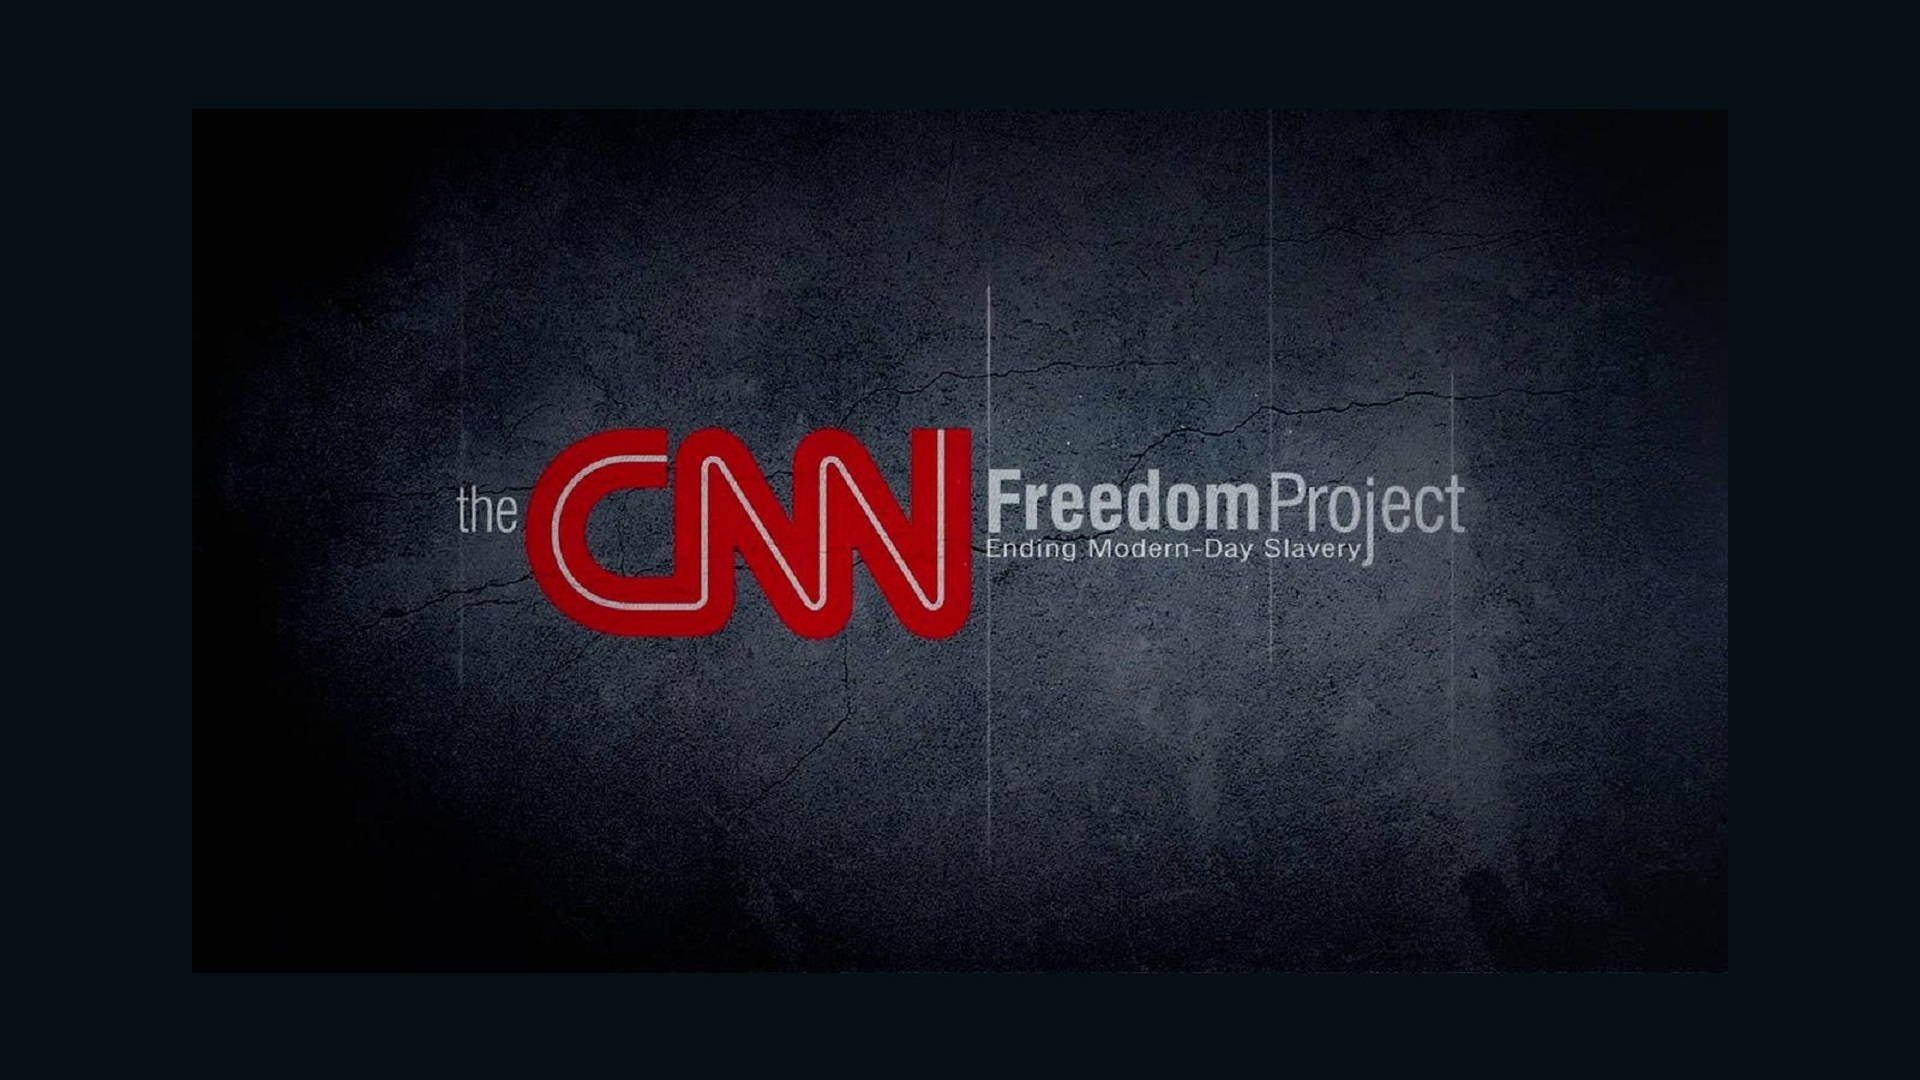 Cnn Freedom Project Background